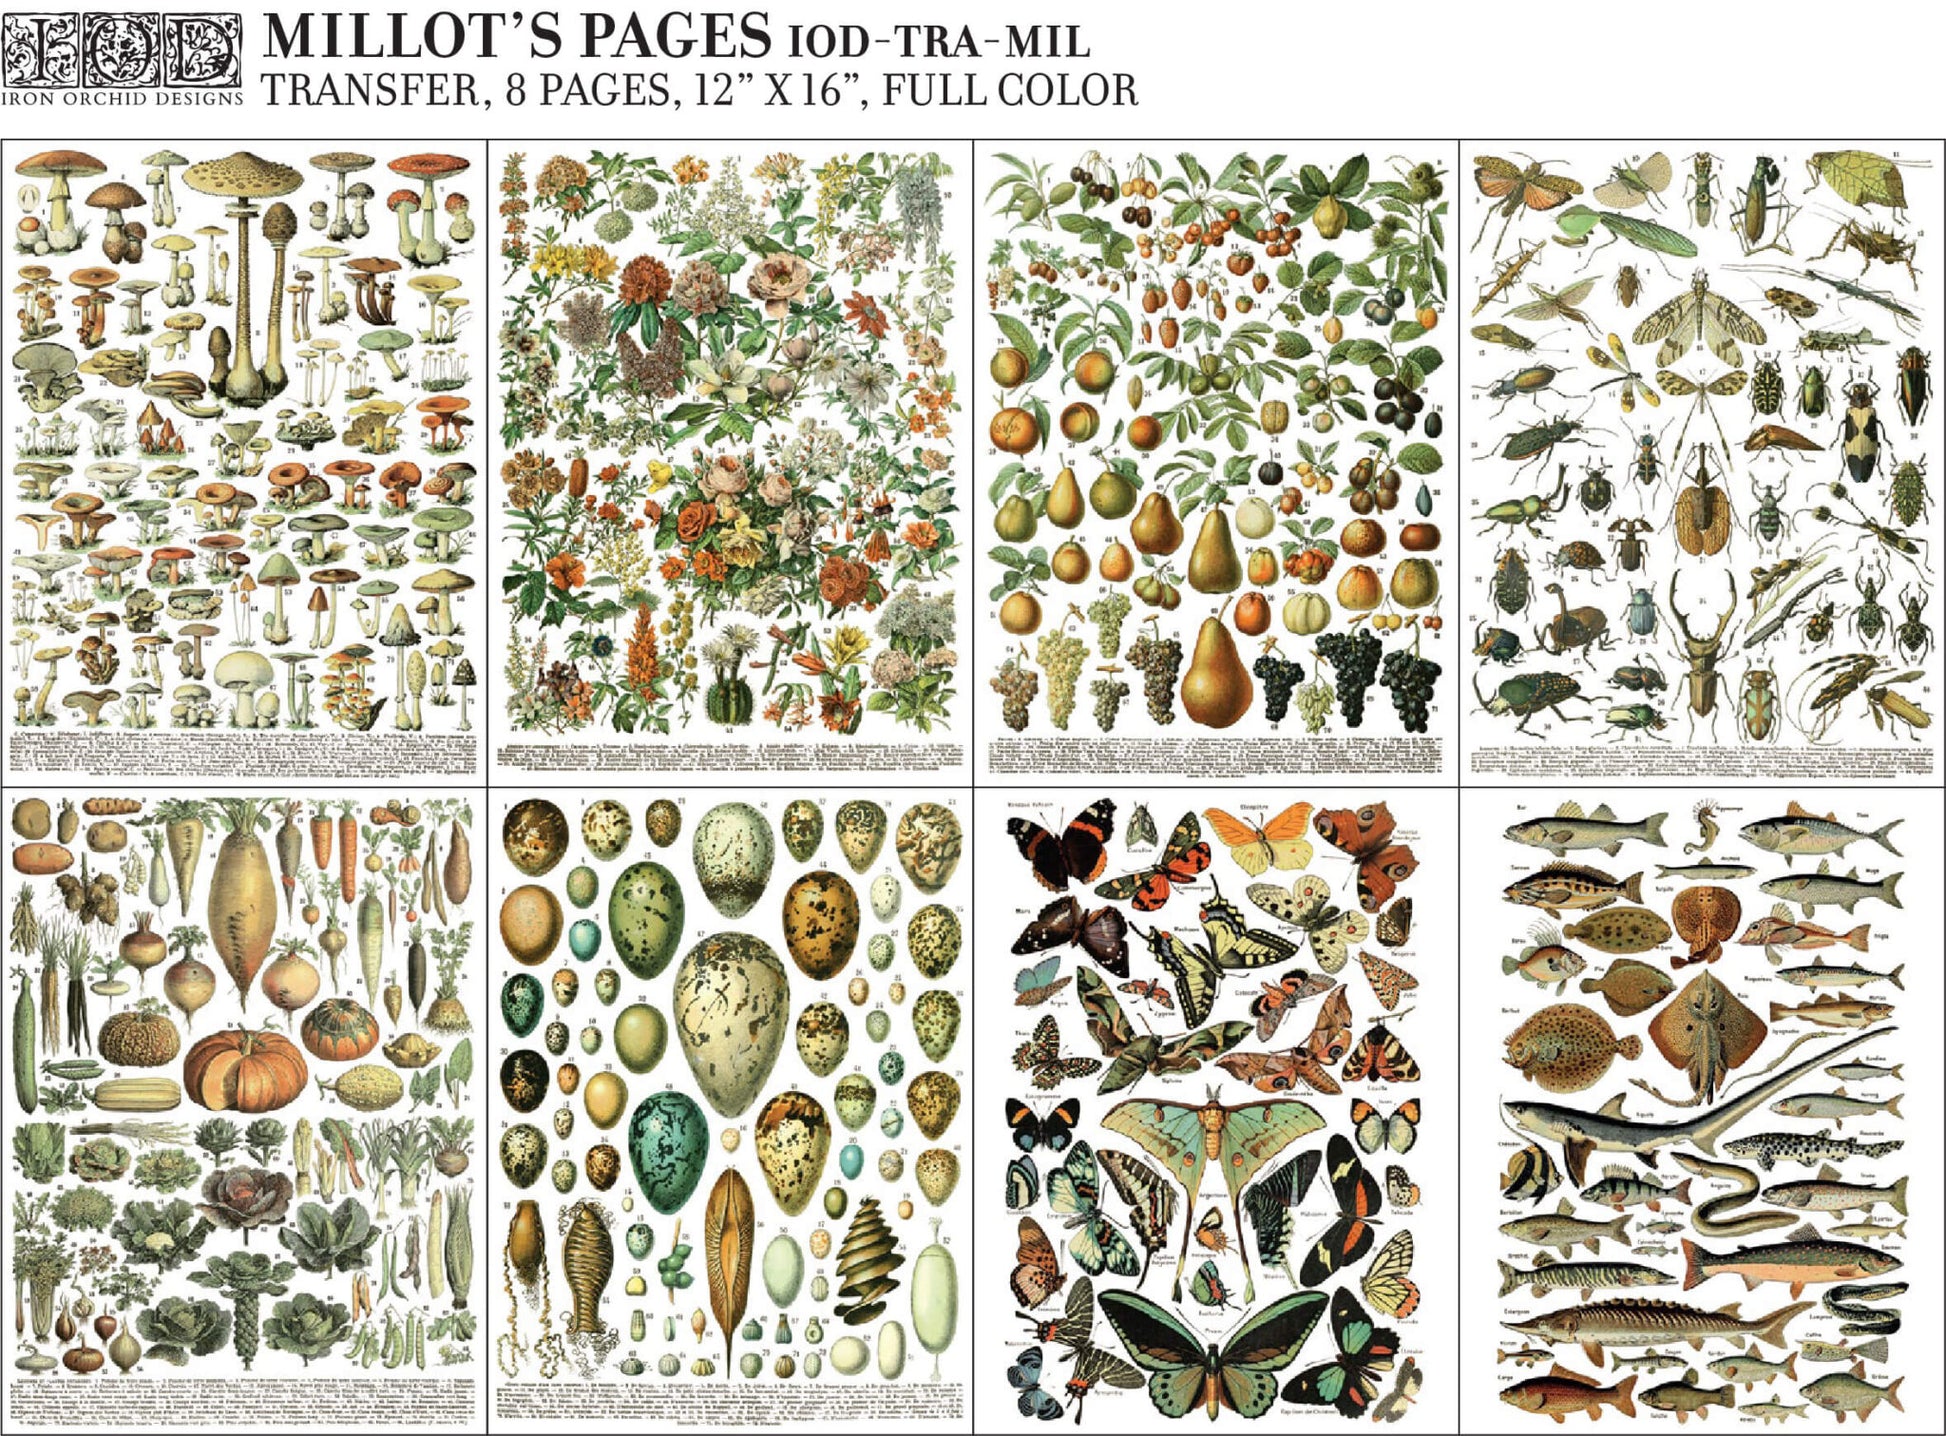 8 pages of Millot's Pages Decor Transfer by IOD